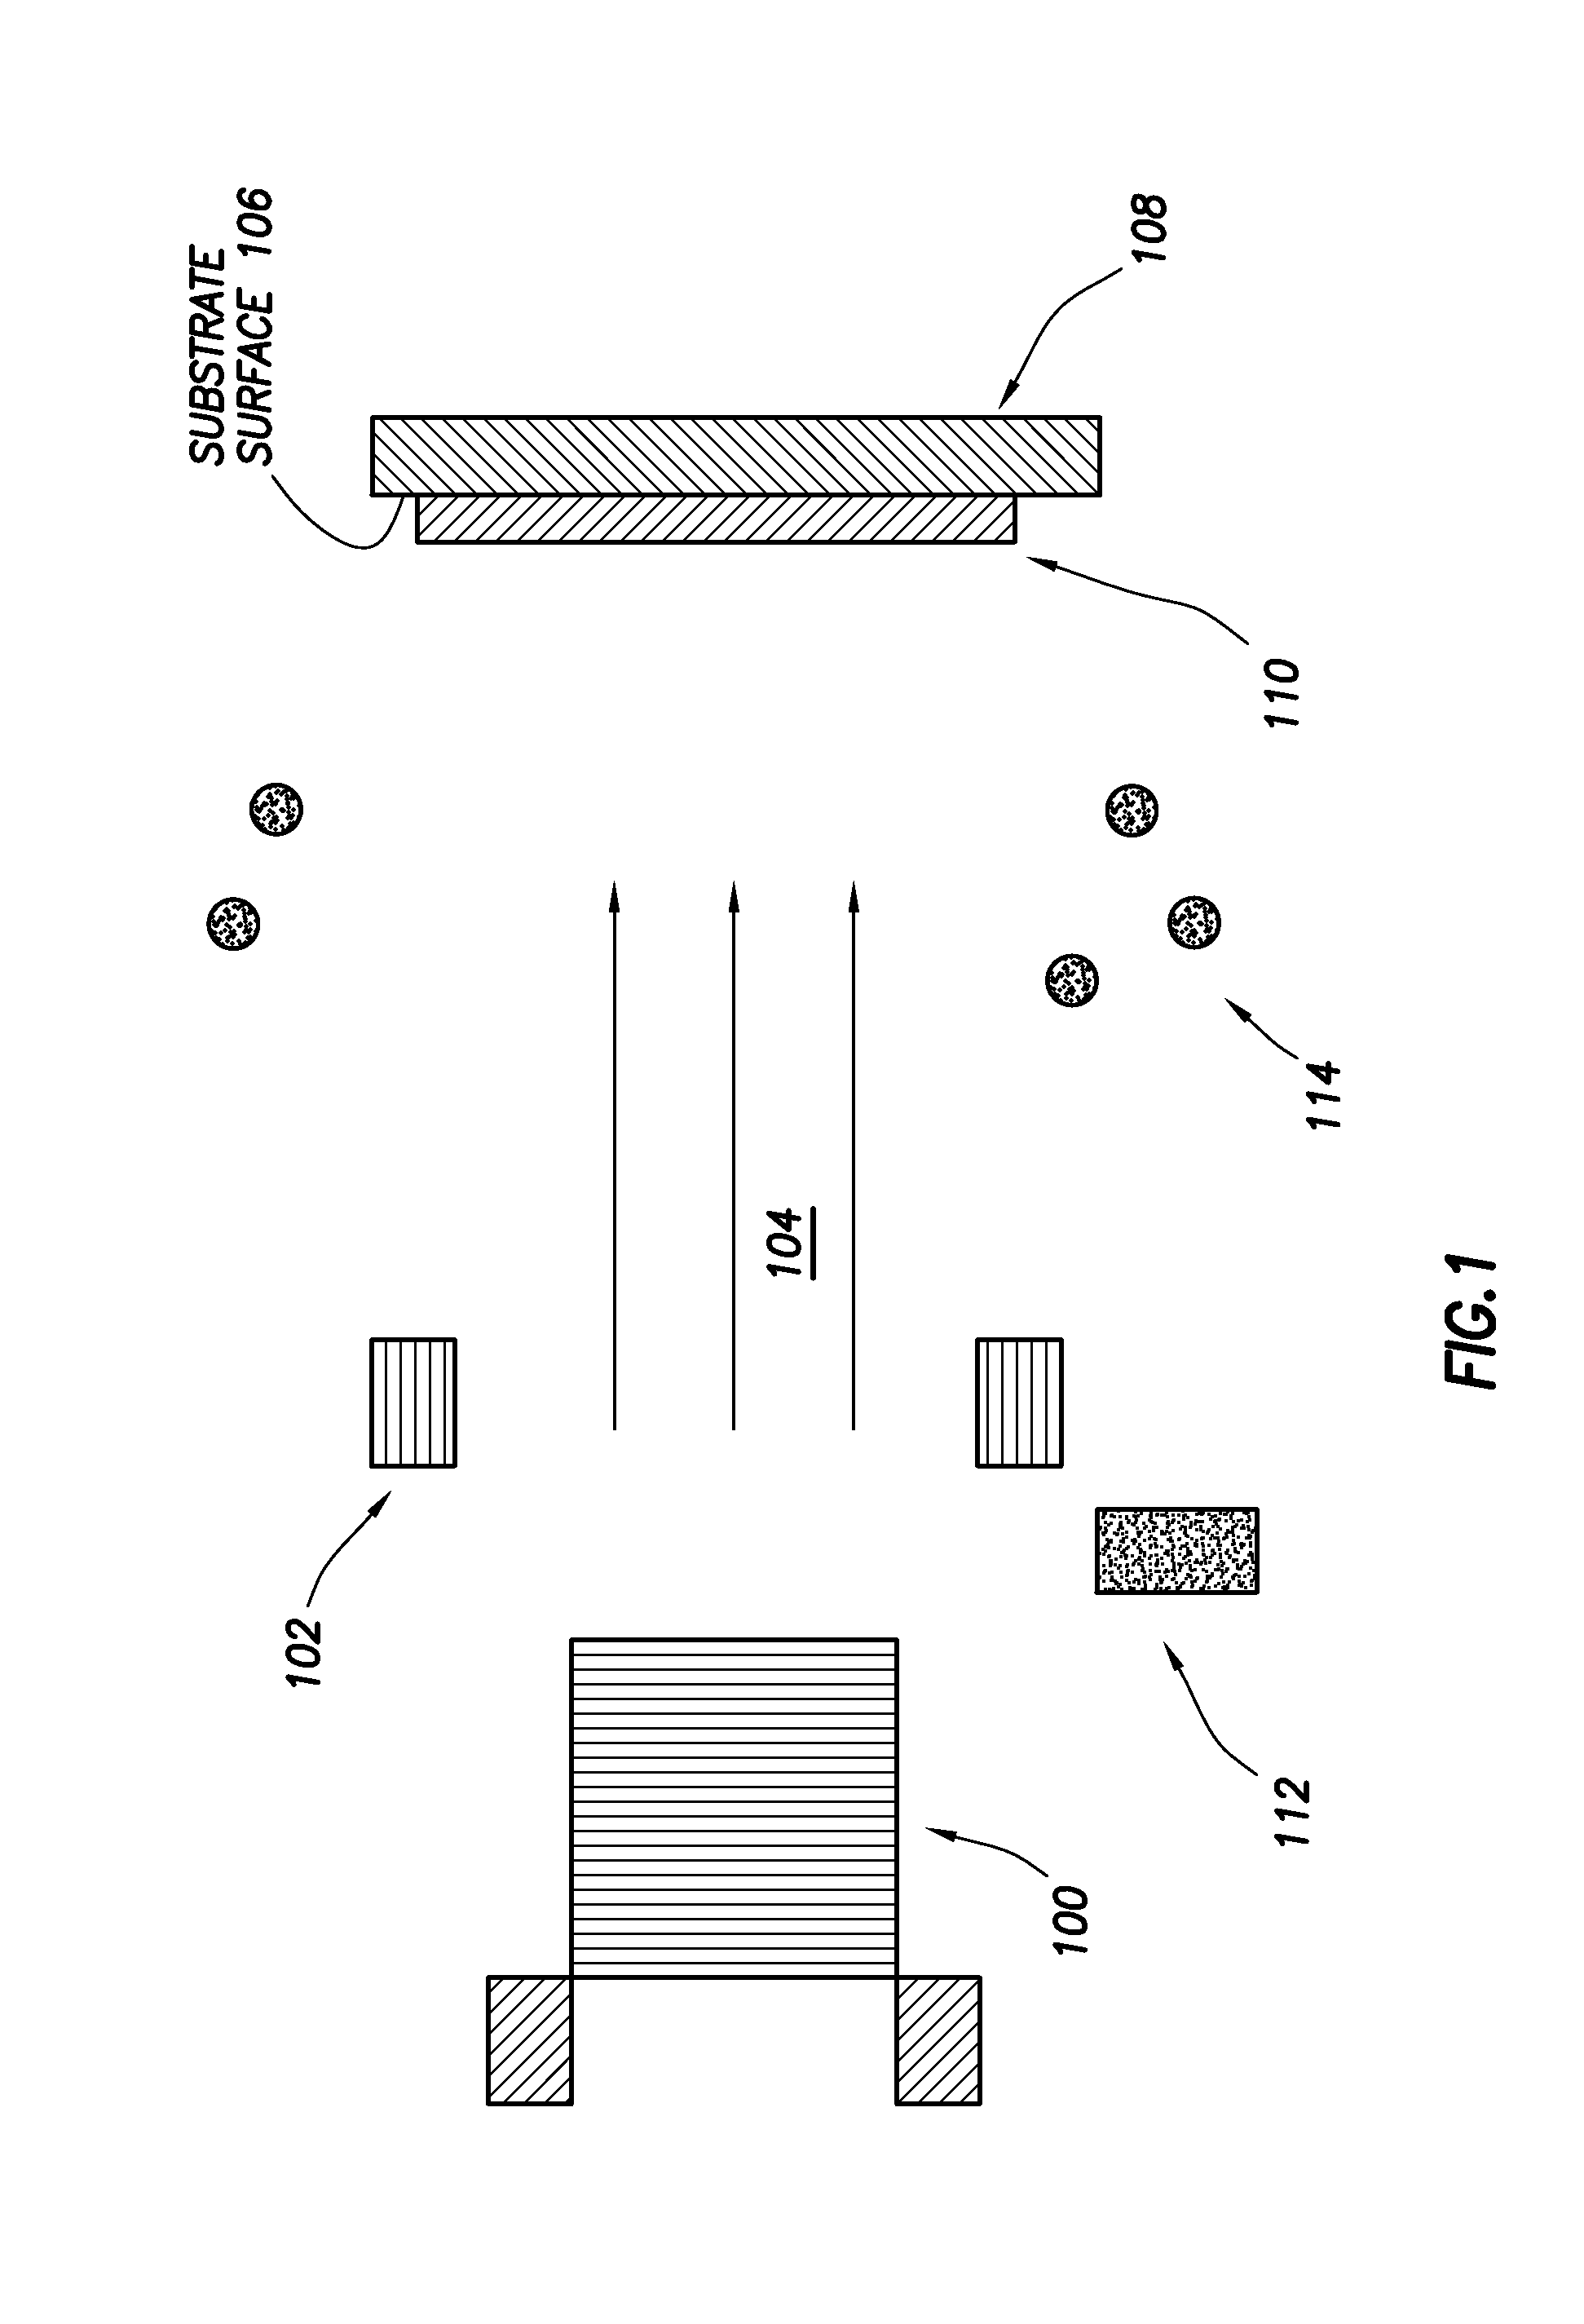 Solid-State Thin-Film Capacitor